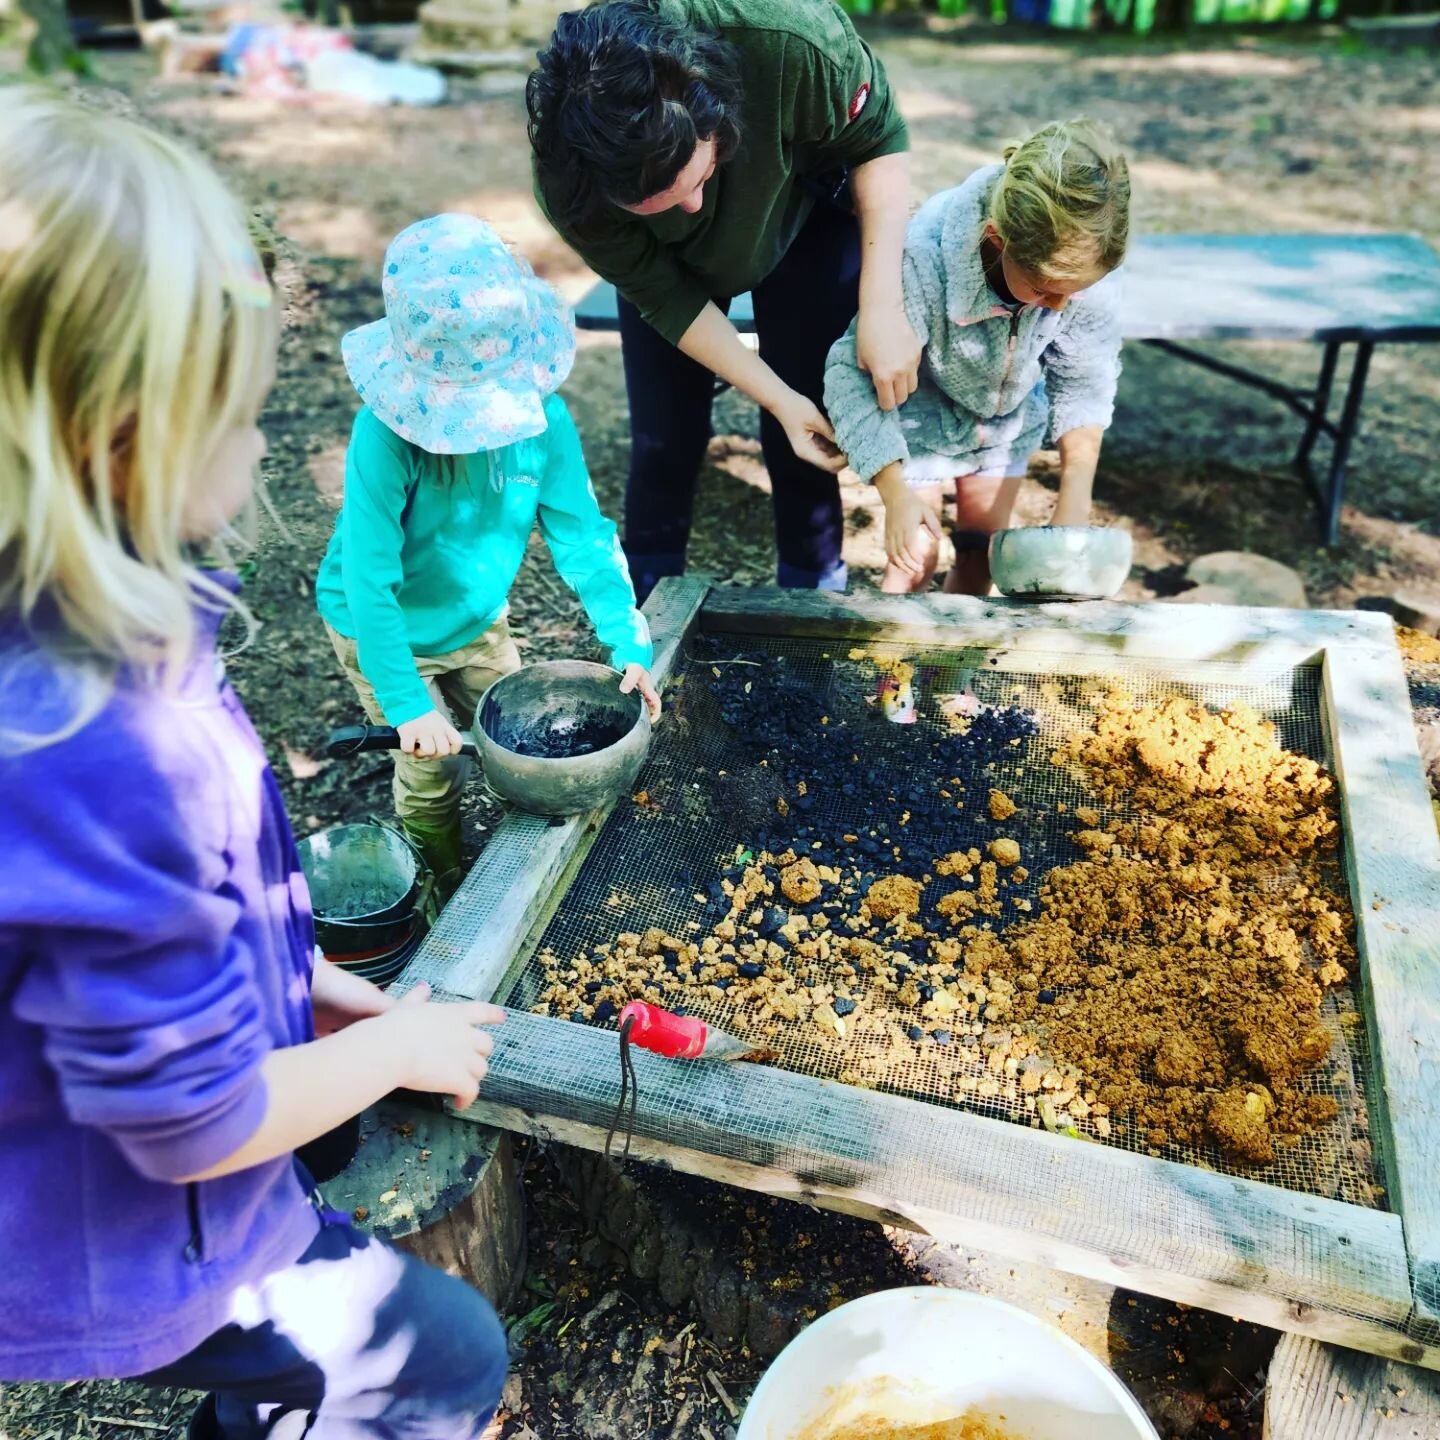 Seed balls and exploring natural pigments this week at The Earth School! 

The children cast their seed balls across the farm in hopes of covering the land in flowers to bring beauty, as well as nourishment for the pollinators... a beautiful dream 🌻